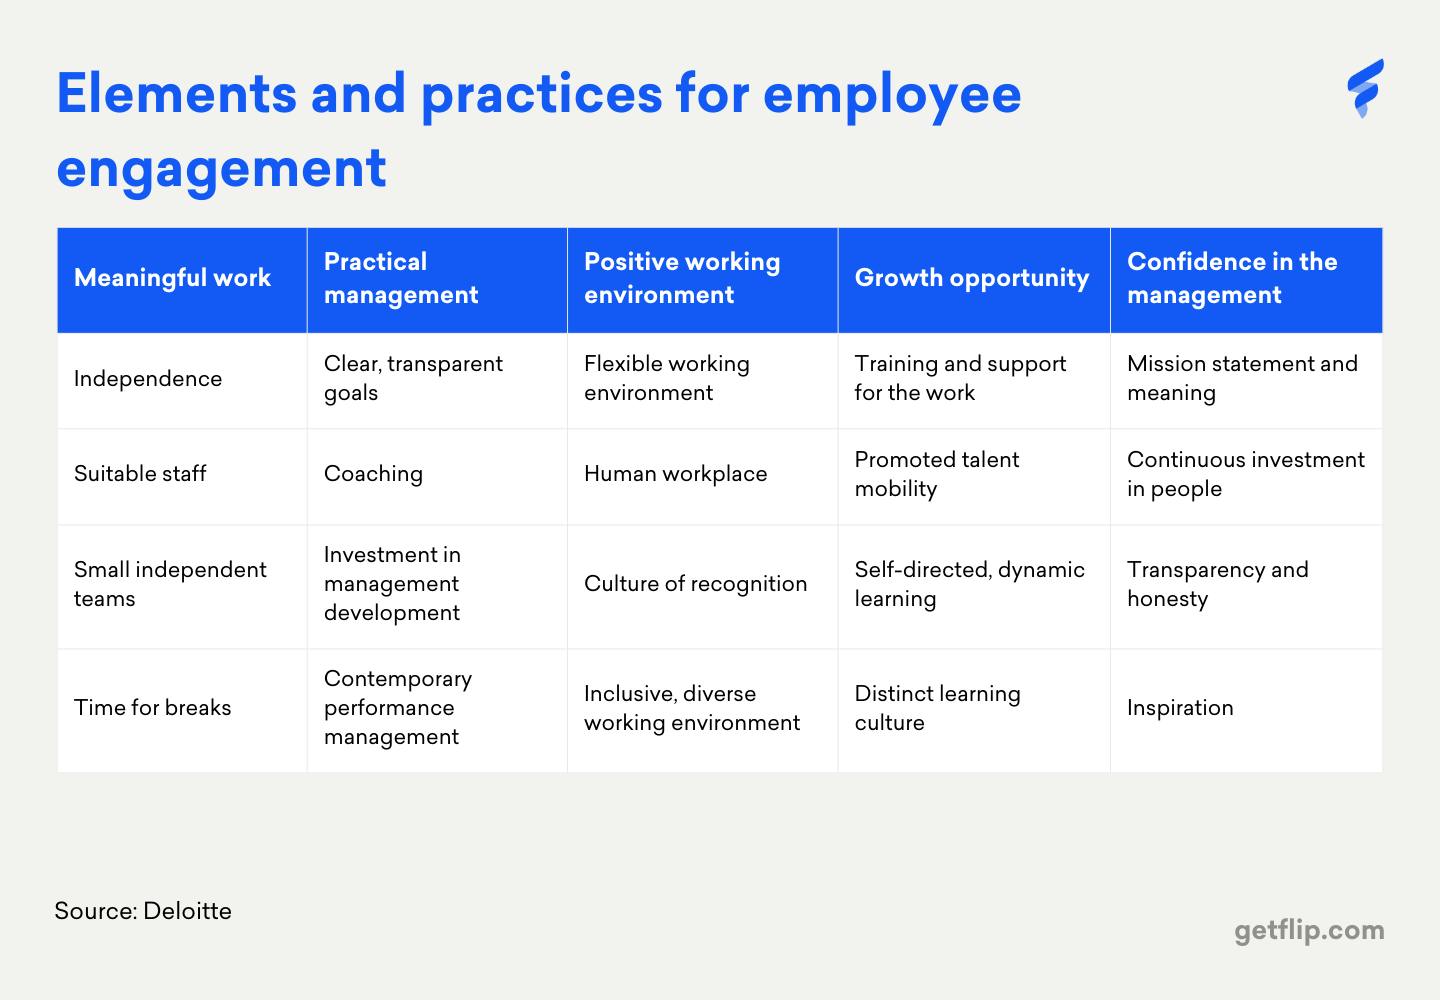 Table of elements and practices for employee engagement